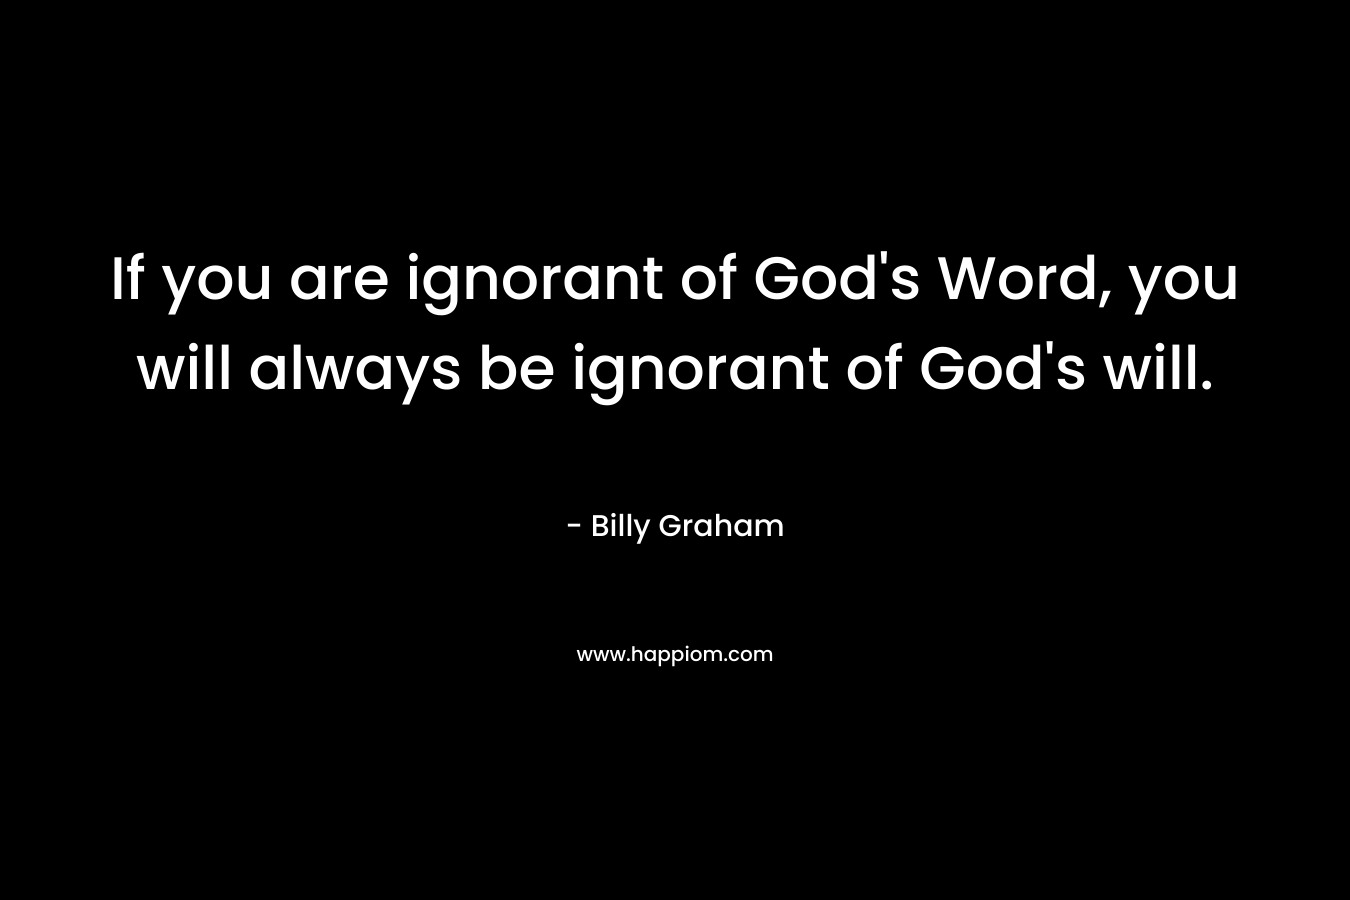 If you are ignorant of God's Word, you will always be ignorant of God's will.